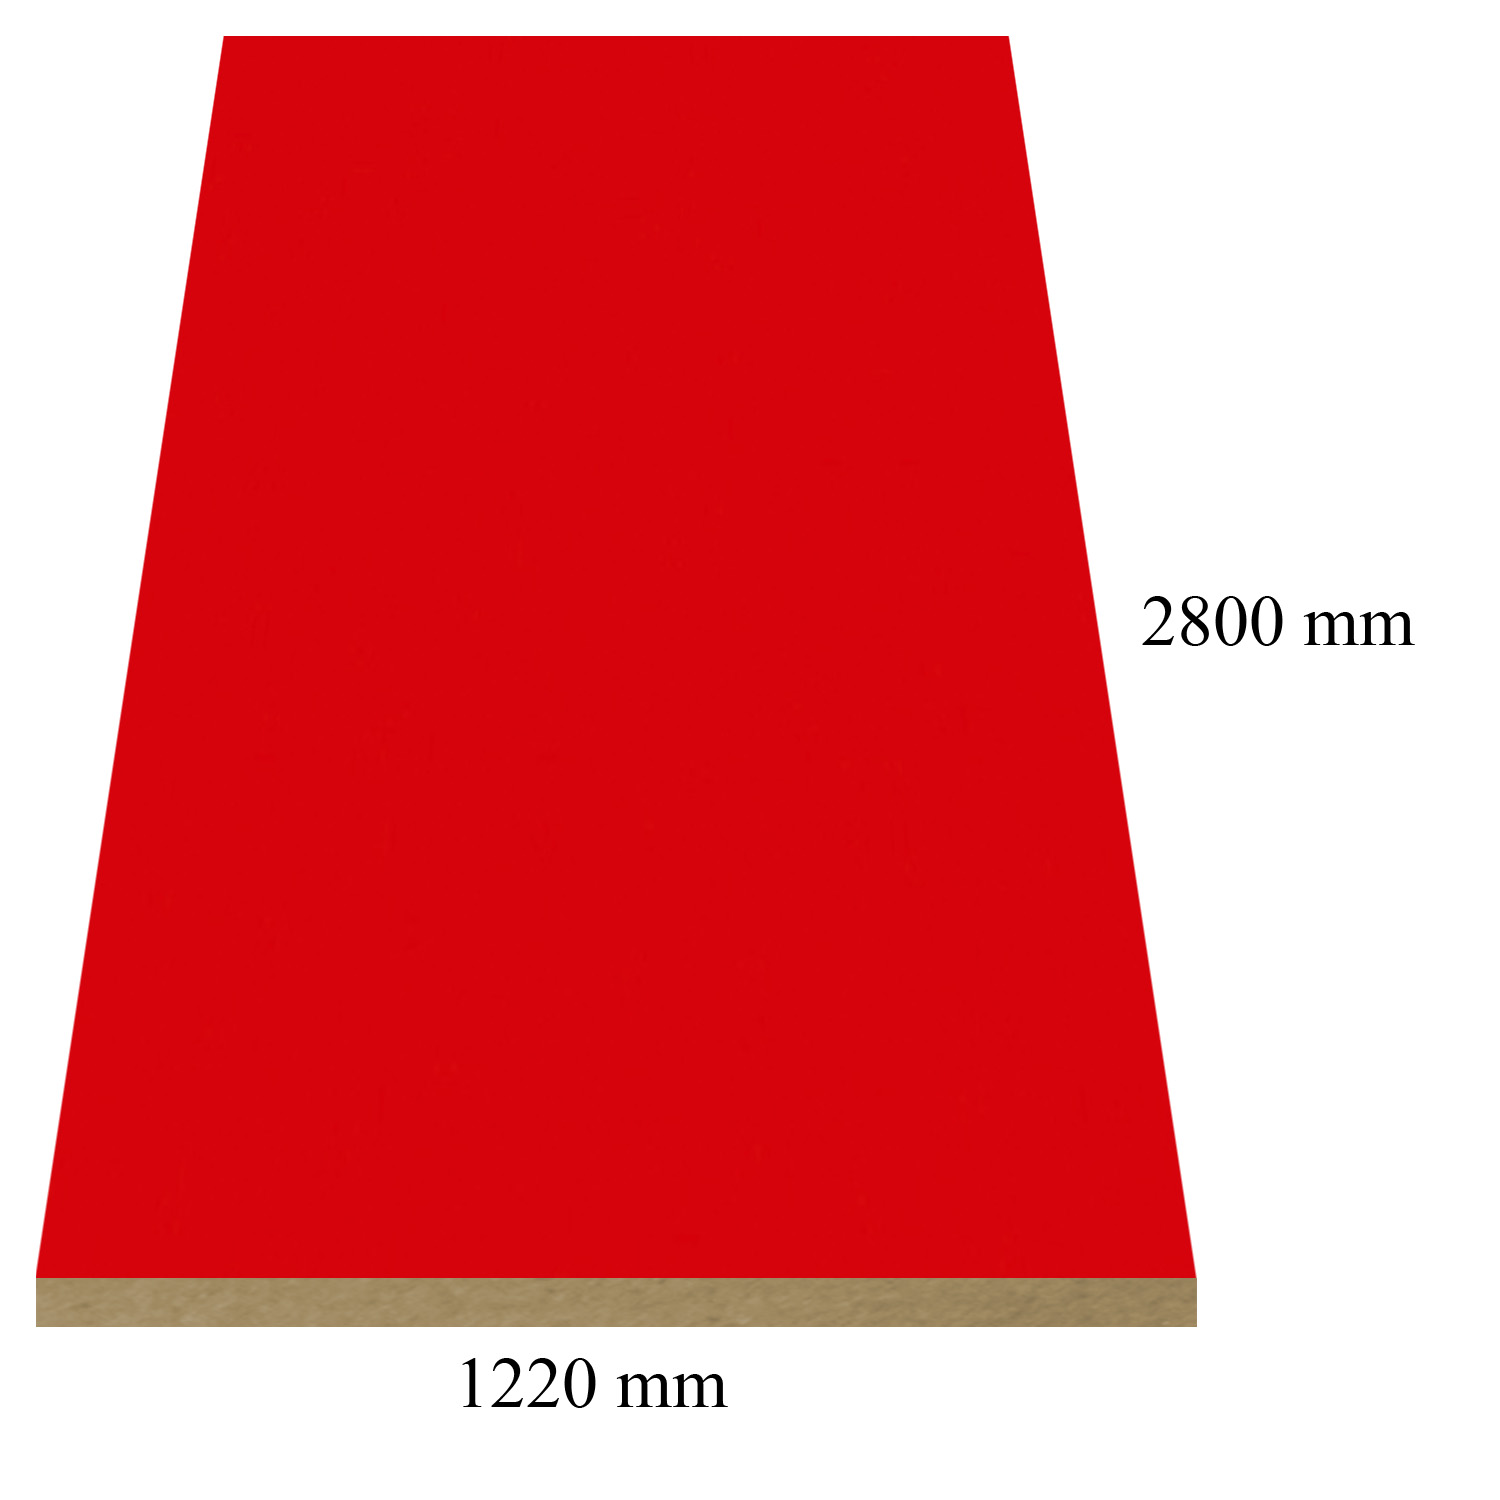 152 Red high gloss - PVC coated 18 mm MDF